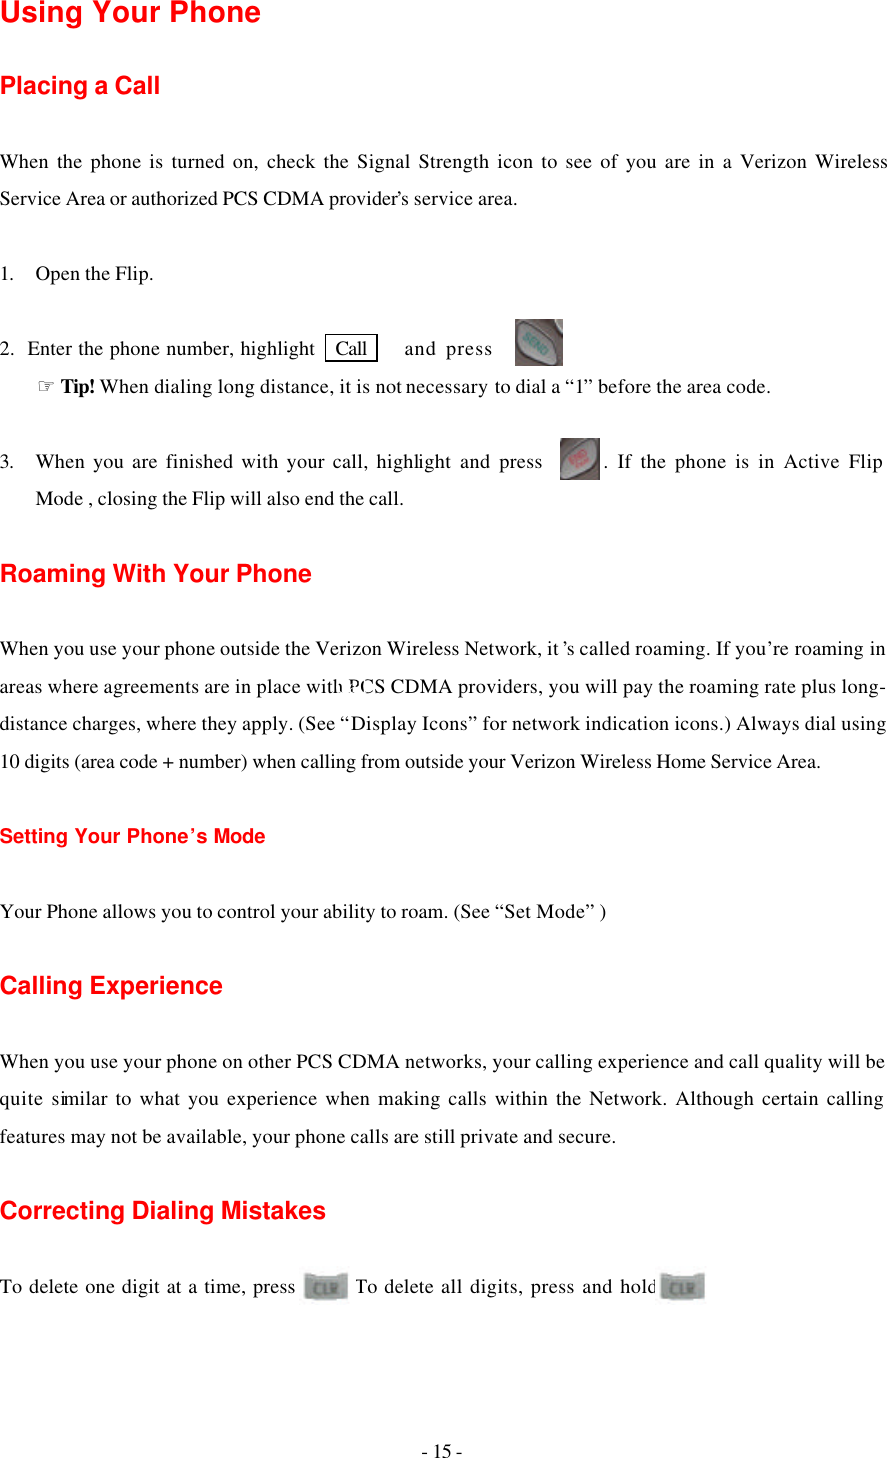 - 15 - Using Your Phone   Placing a Call  When the phone is turned on, check the Signal Strength icon to see of you are in a Verizon Wireless  Service Area or authorized PCS CDMA provider’s service area.  1. Open the Flip.  2.  Enter the phone number, highlight   Call    and press       .     ☞Tip! When dialing long distance, it is not necessary to dial a “1” before the area code.  3. When you are finished with your call, highlight and press       . If the phone is in Active Flip Mode , closing the Flip will also end the call.  Roaming With Your Phone  When you use your phone outside the Verizon Wireless Network, it ’s called roaming. If you’re roaming in areas where agreements are in place with PCS CDMA providers, you will pay the roaming rate plus long-distance charges, where they apply. (See “Display Icons” for network indication icons.) Always dial using 10 digits (area code + number) when calling from outside your Verizon Wireless Home Service Area.  Setting Your Phone’s Mode  Your Phone allows you to control your ability to roam. (See “Set Mode” )  Calling Experience  When you use your phone on other PCS CDMA networks, your calling experience and call quality will be quite similar to what you experience when making calls within the Network. Although certain calling features may not be available, your phone calls are still private and secure.  Correcting Dialing Mistakes  To delete one digit at a time, press       . To delete all digits, press and hold      .  Call 